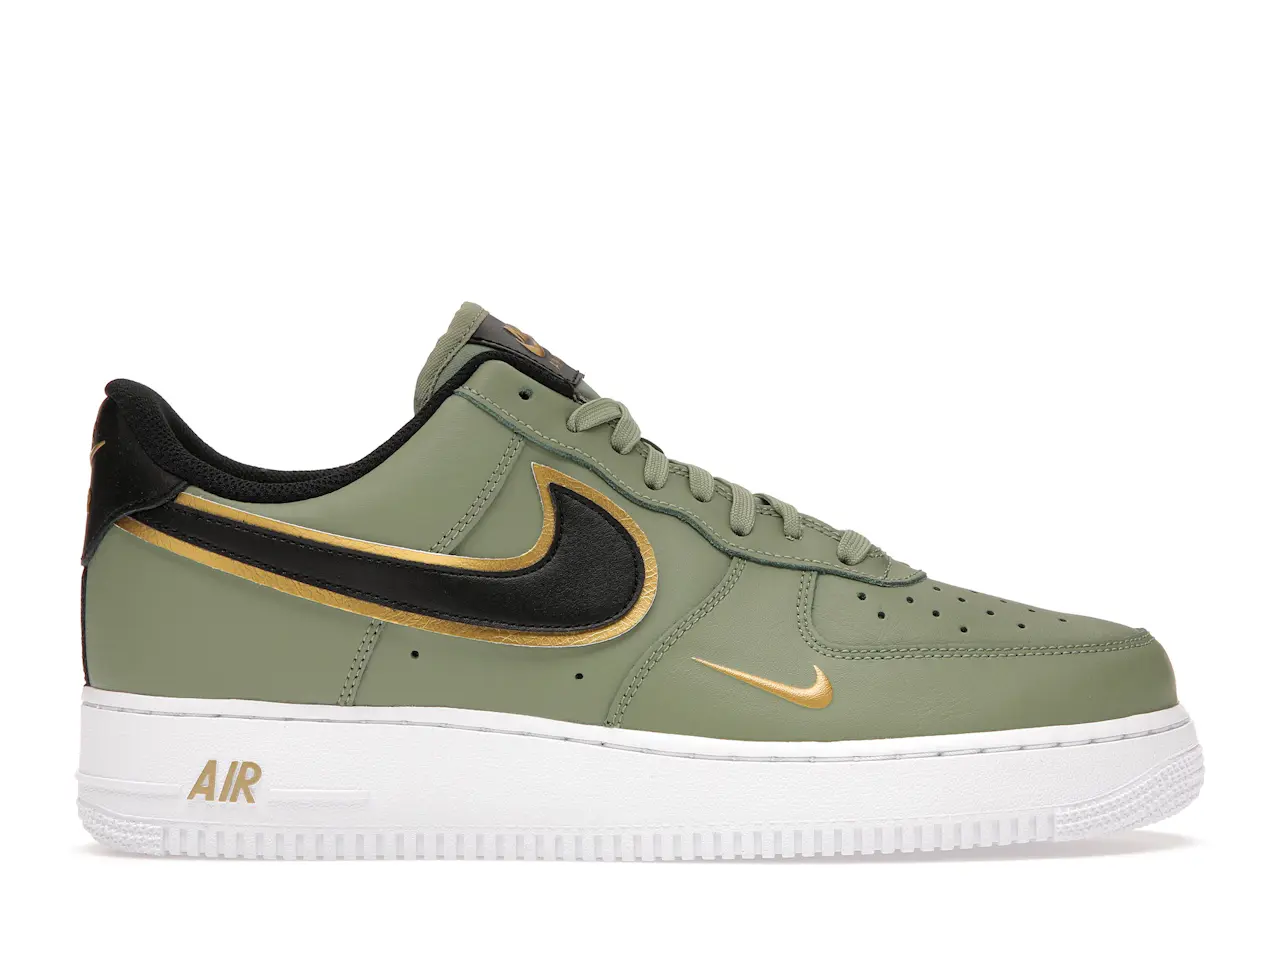 Nike Air Force 1 Low '07 LV8 Double Swoosh Olive Gold Black Men's ...